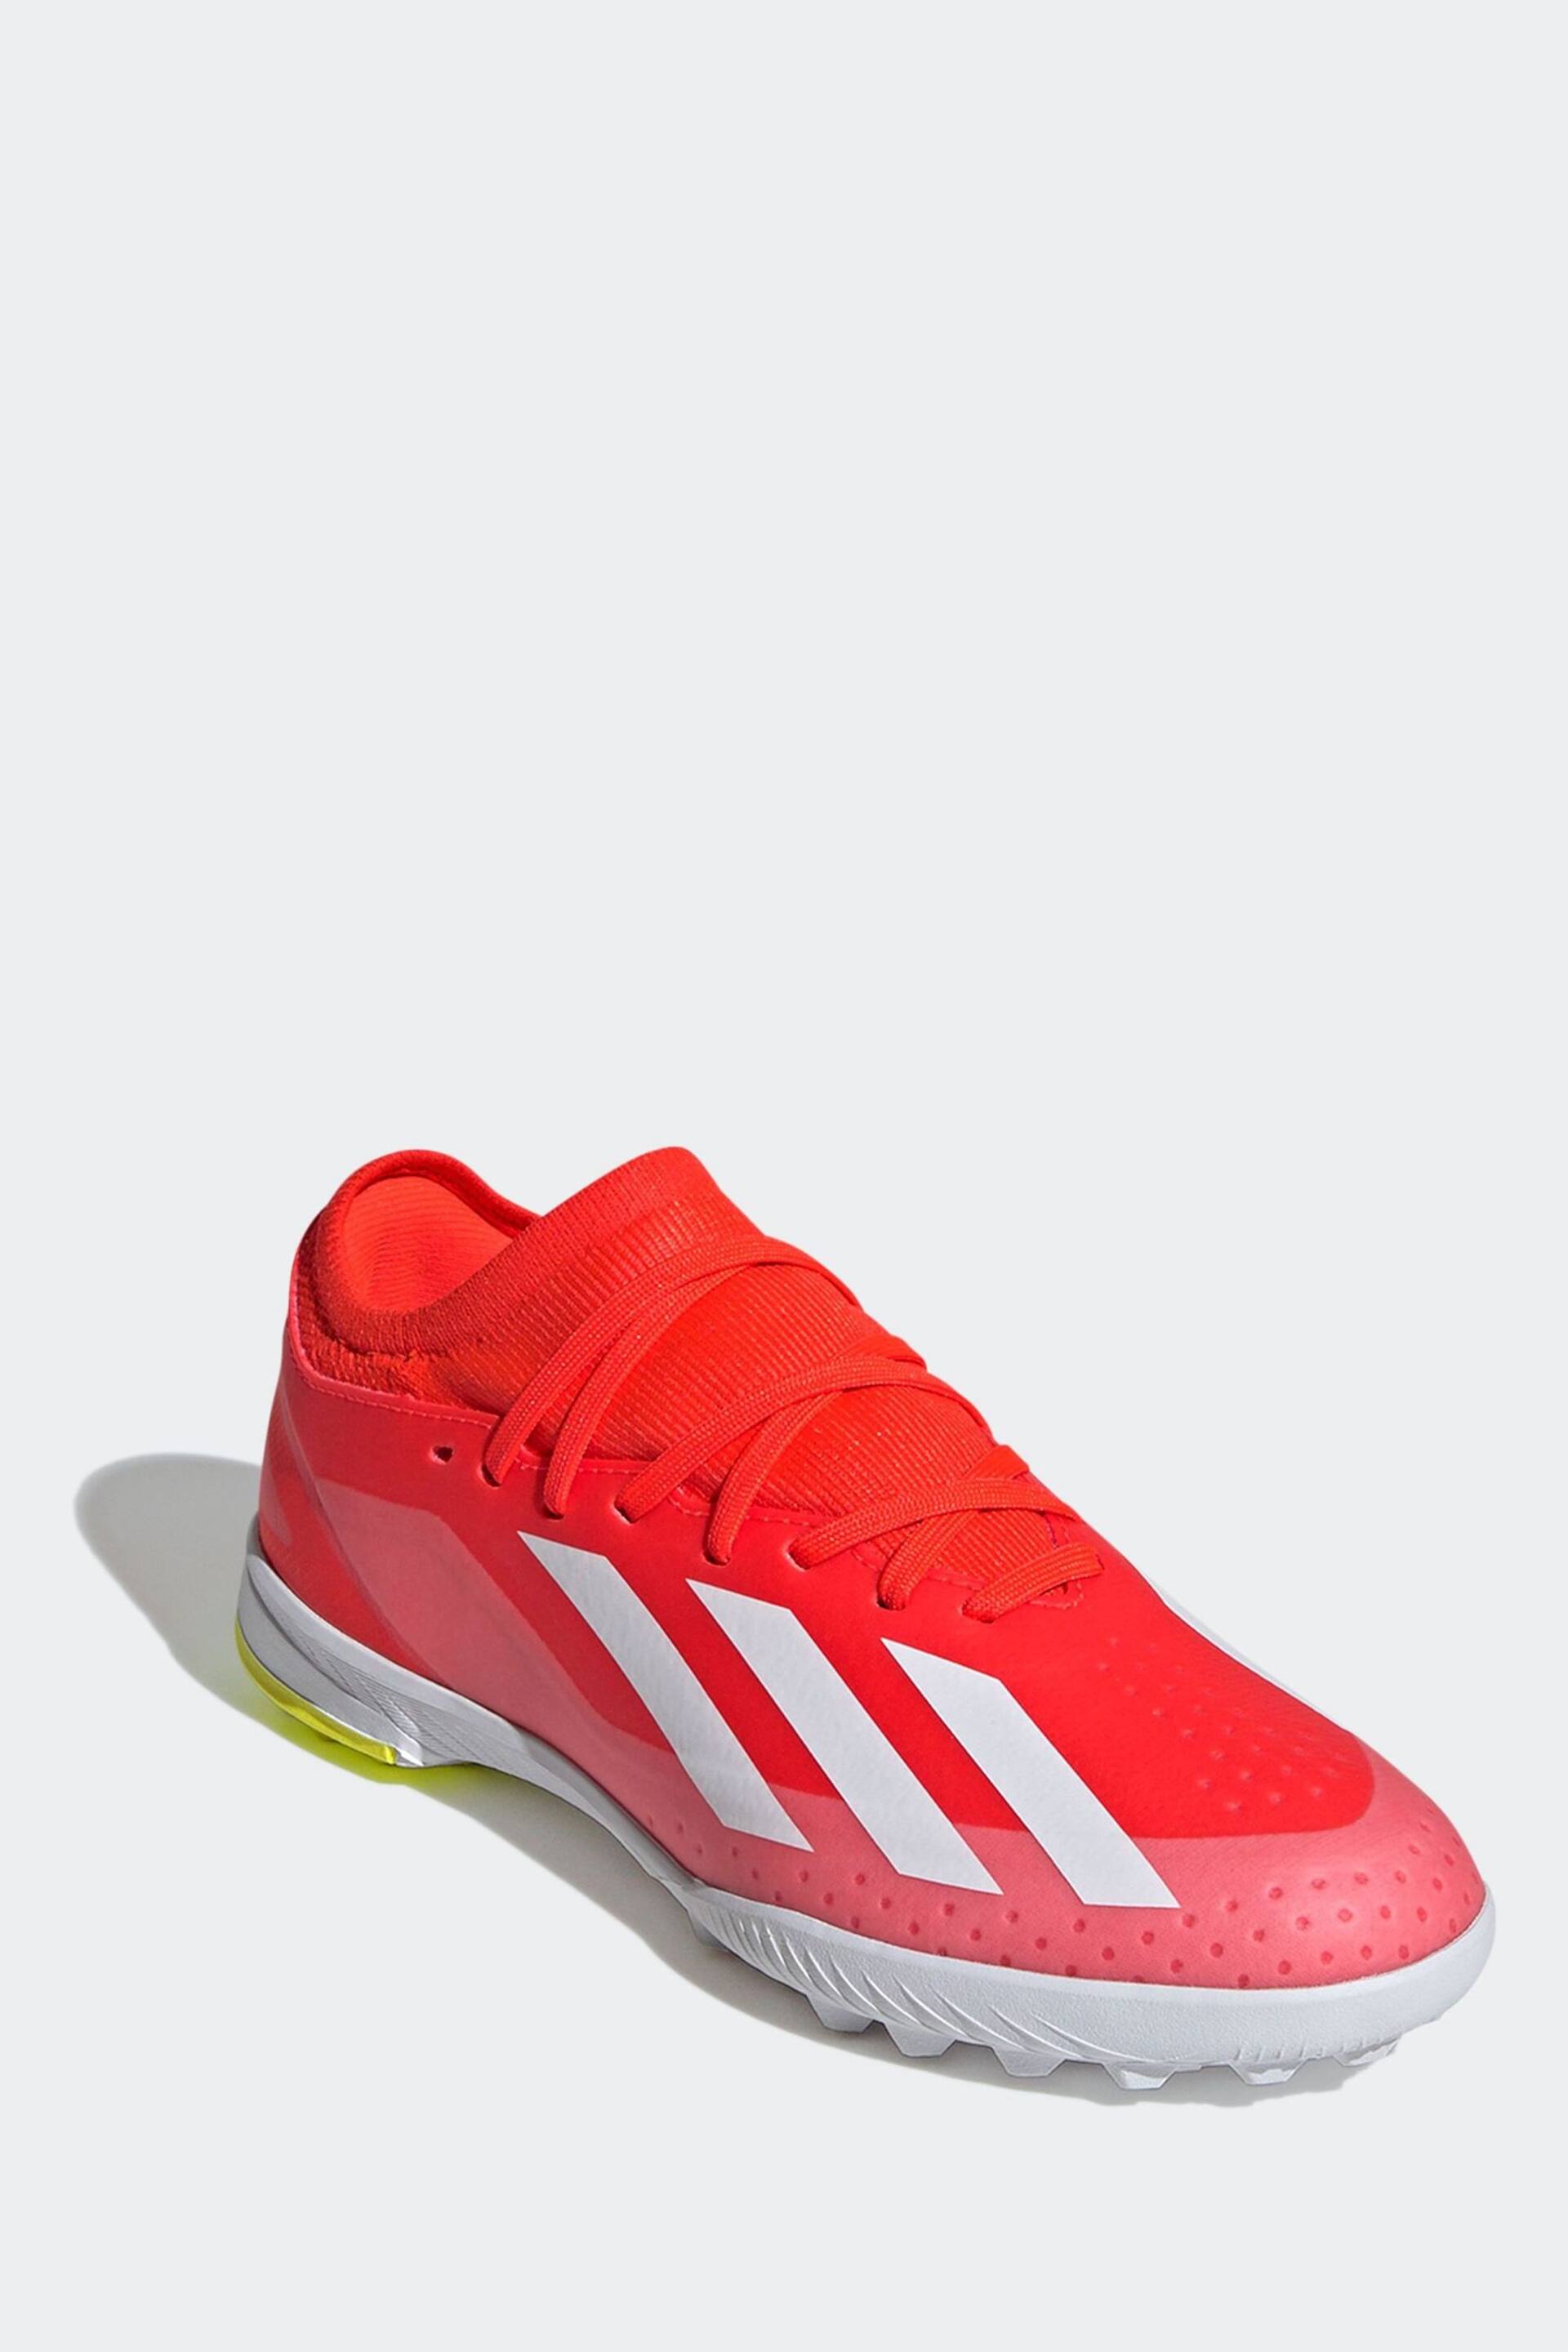 adidas Red/White Football X Crazyfast League Turf Kids Boots - Image 3 of 10